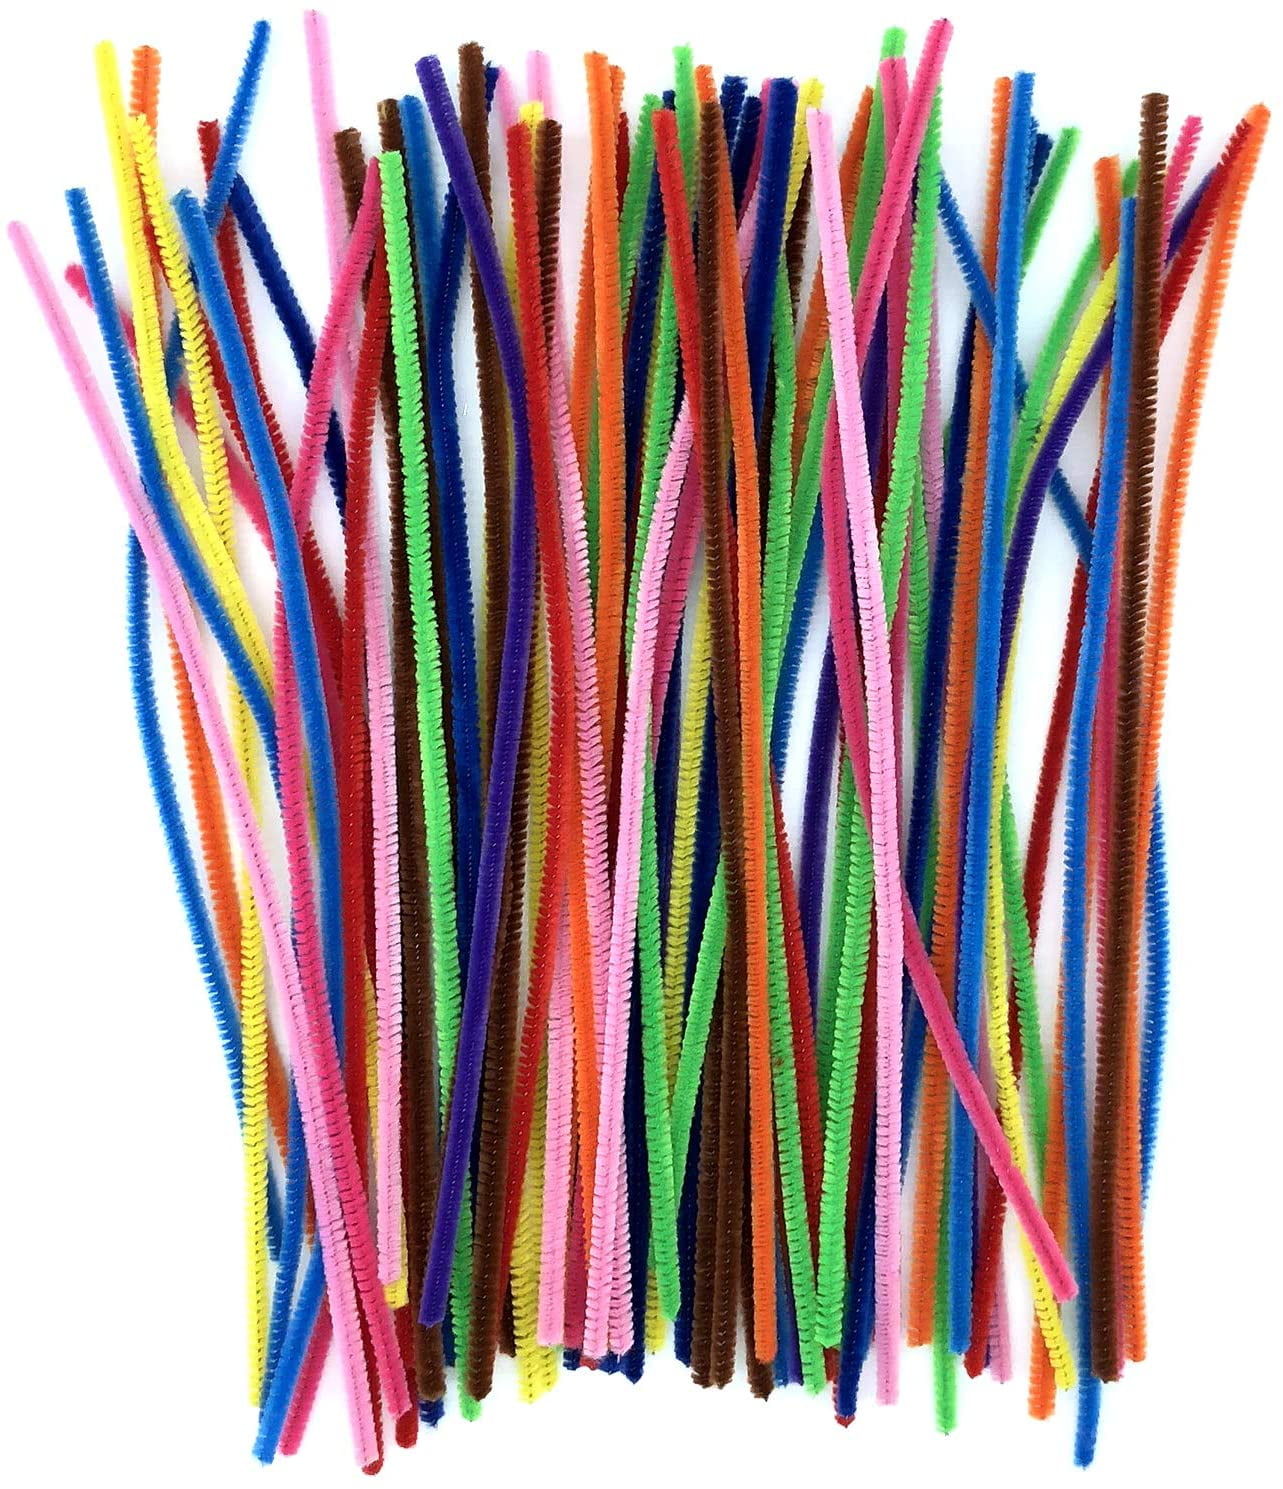  Skin Color Colorful Craft Pipe Cleaners Craft Supplies